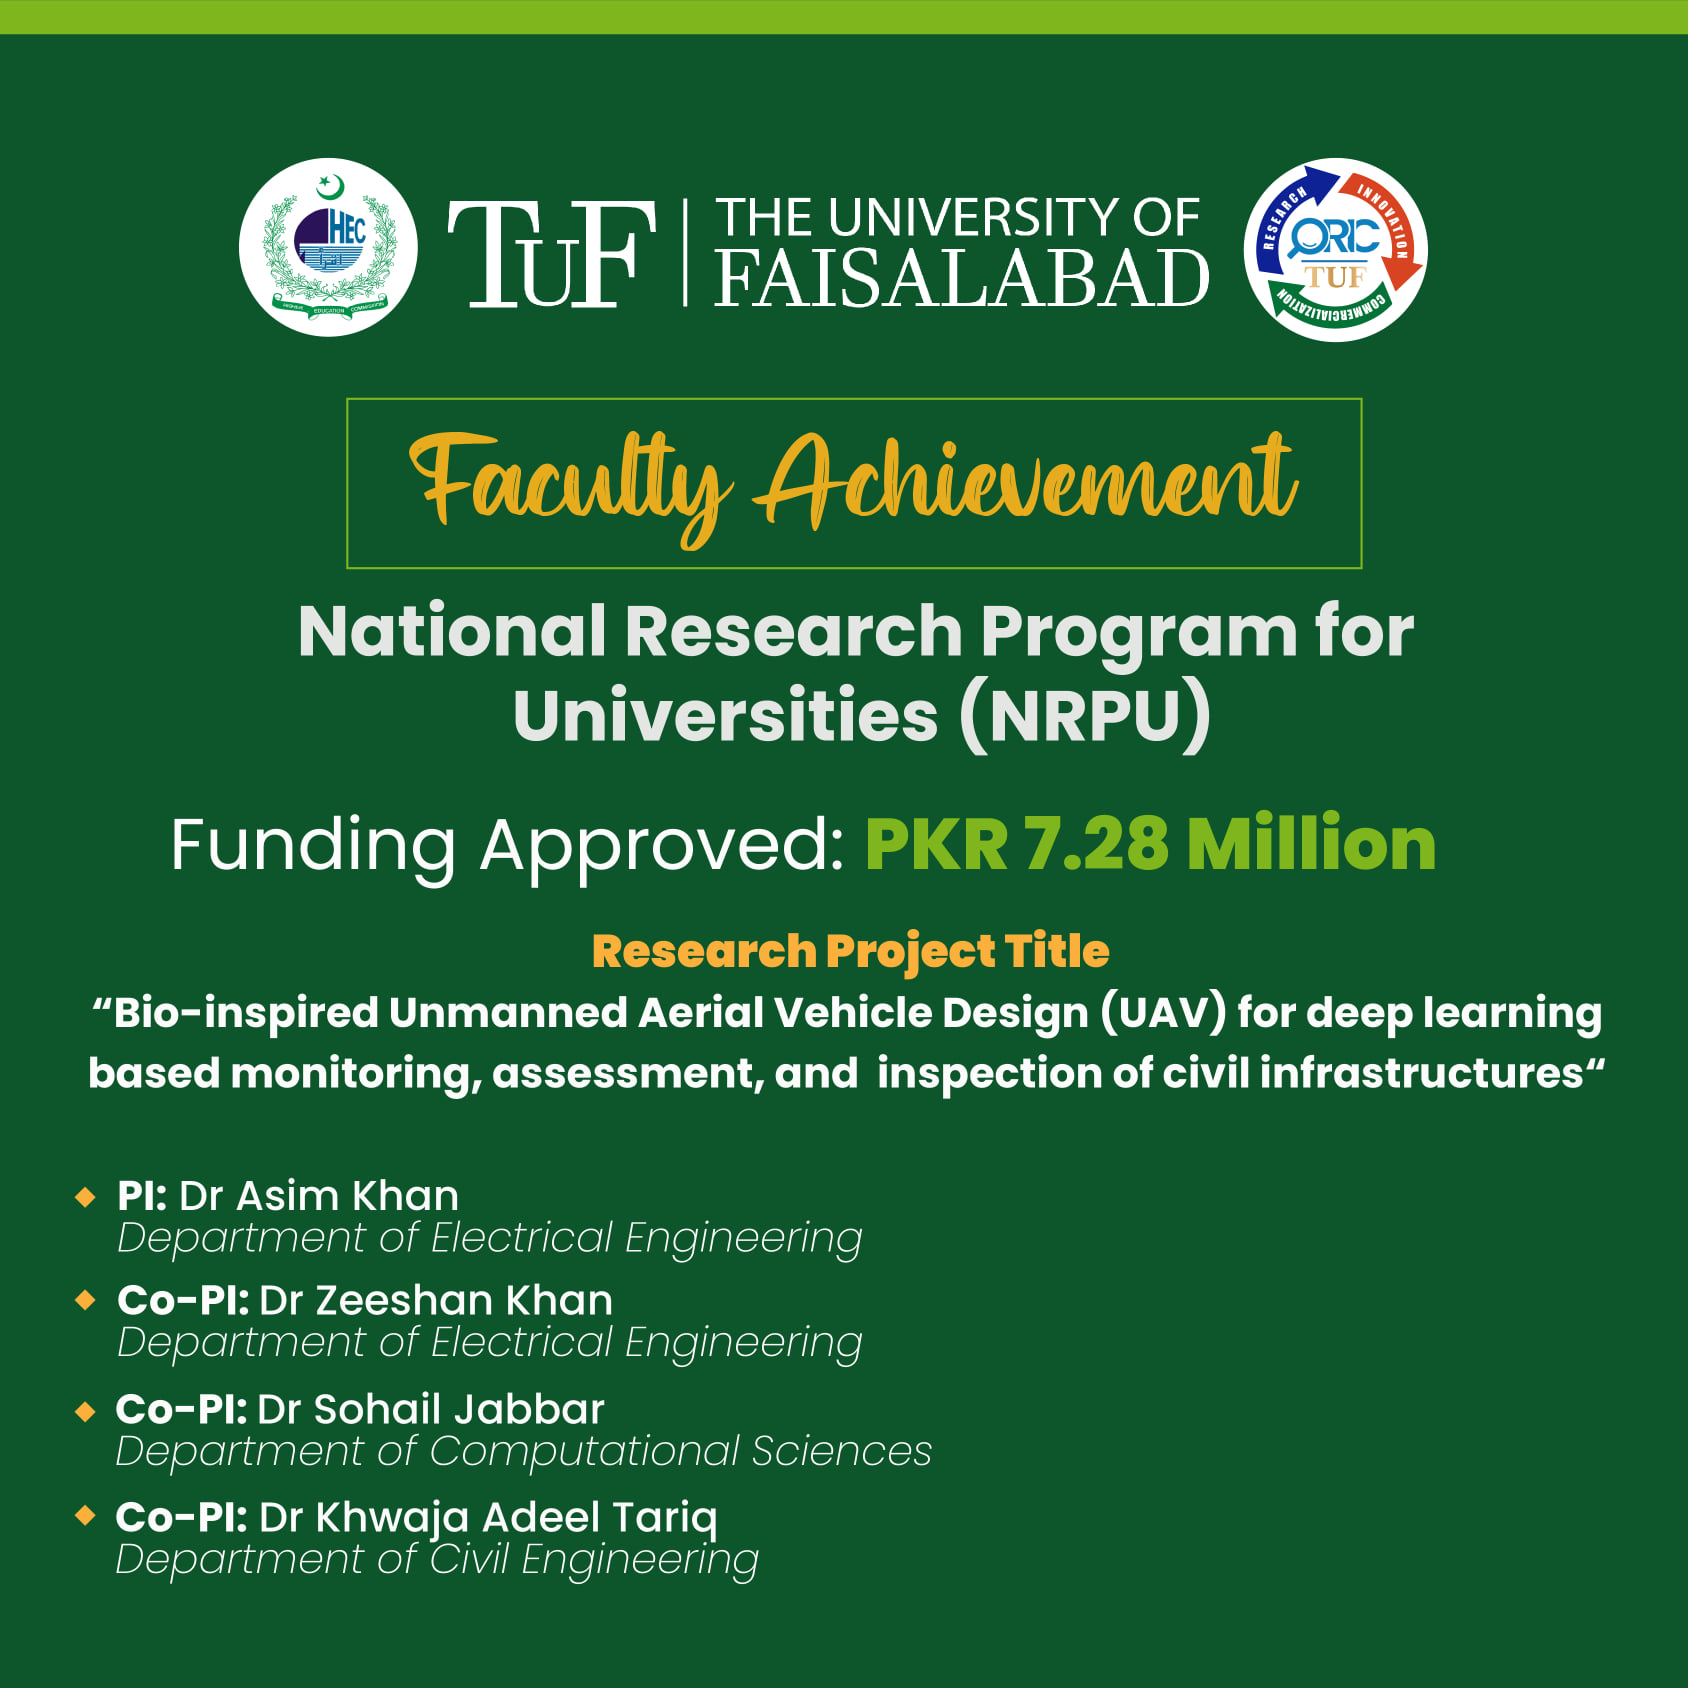 Faculty Achievement National Research Program for Universities.